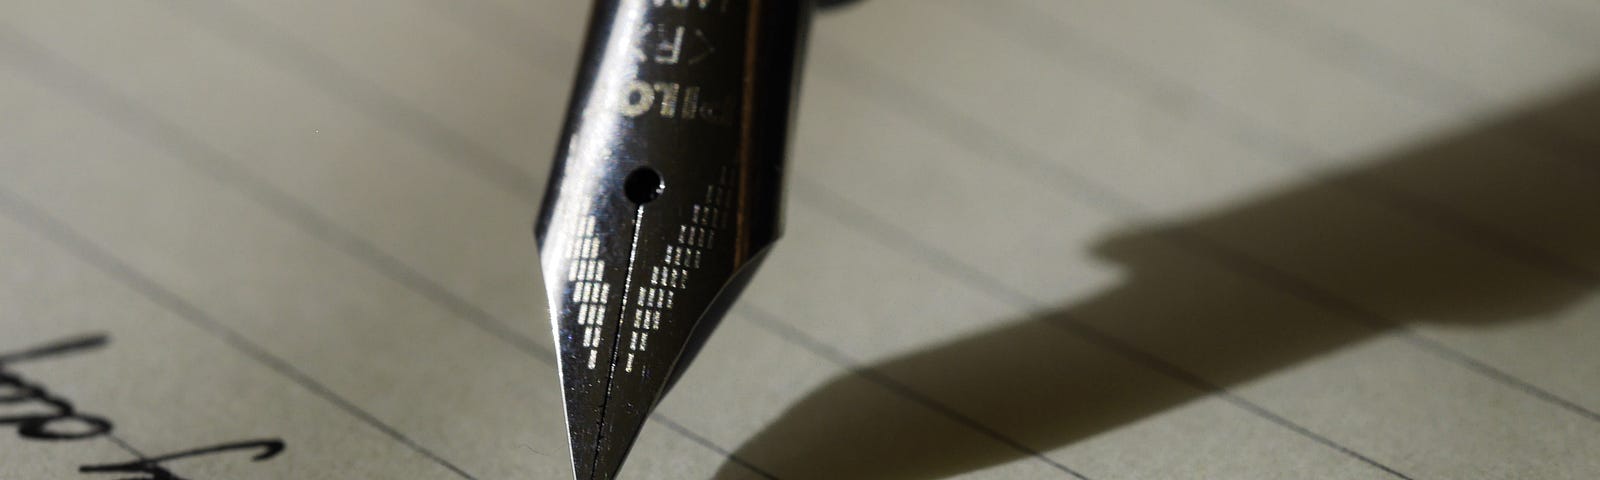 A close up photograph of a fountain pen mid-writing. A small amount of the handwriting can be see, although it is illegible and very cursive.